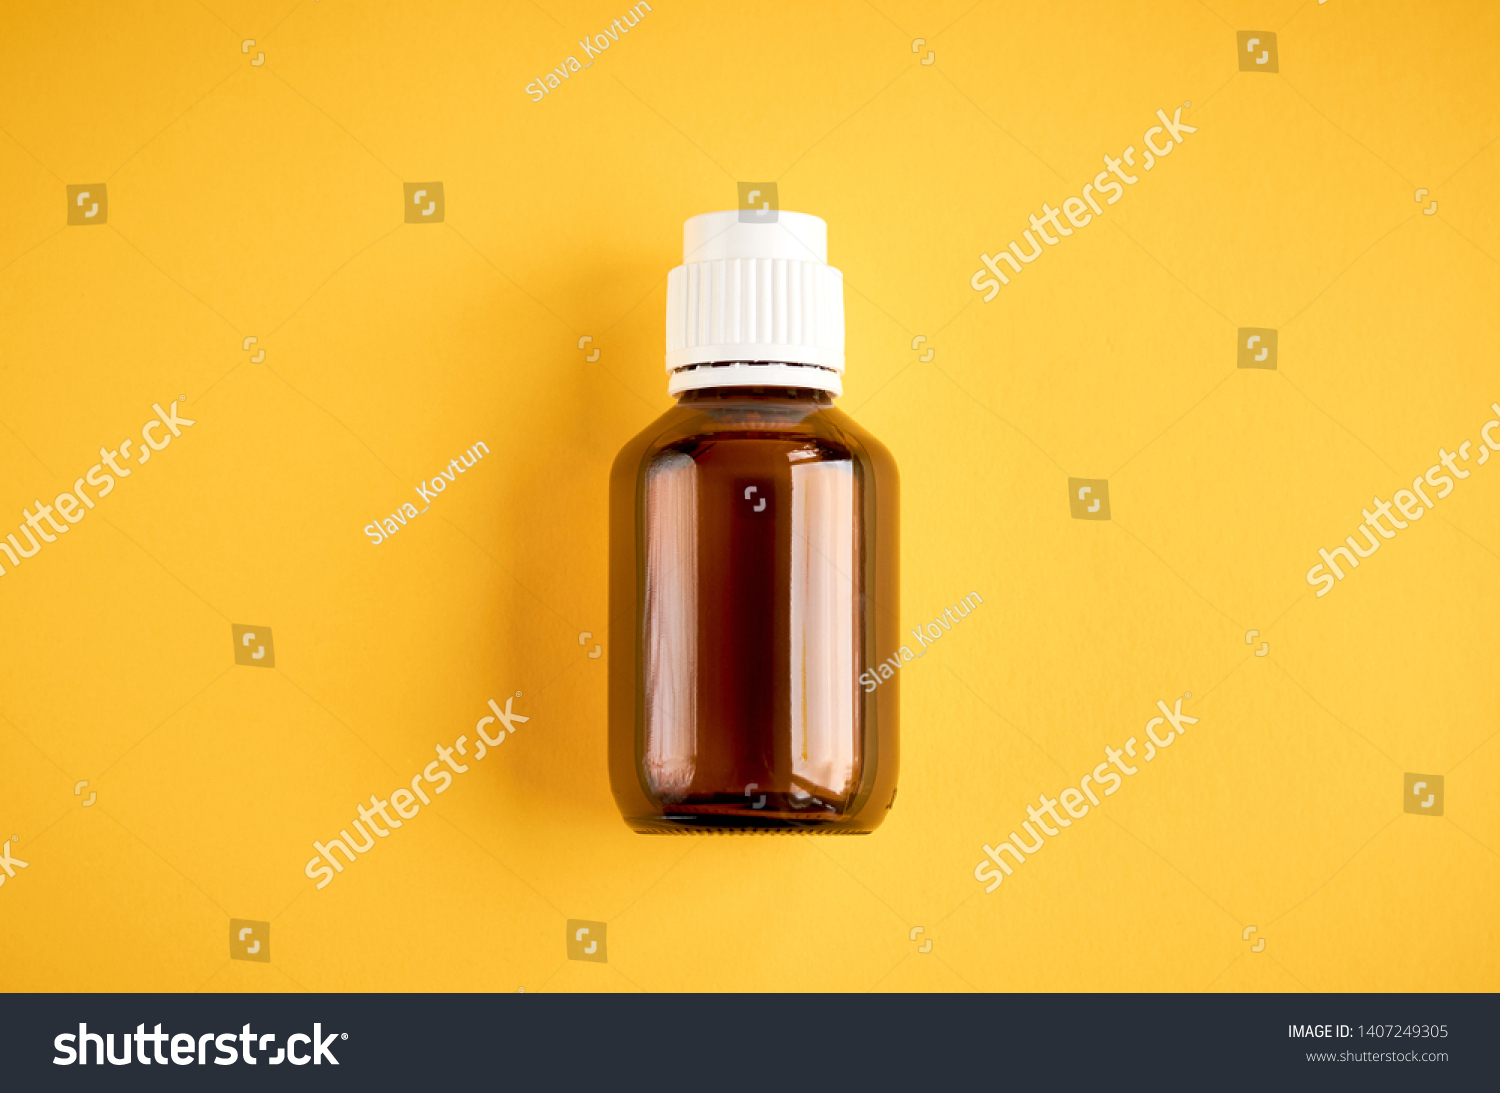 Download Syrup Glass Bottle Composition On Yellow Stock Photo Edit Now 1407249305 PSD Mockup Templates